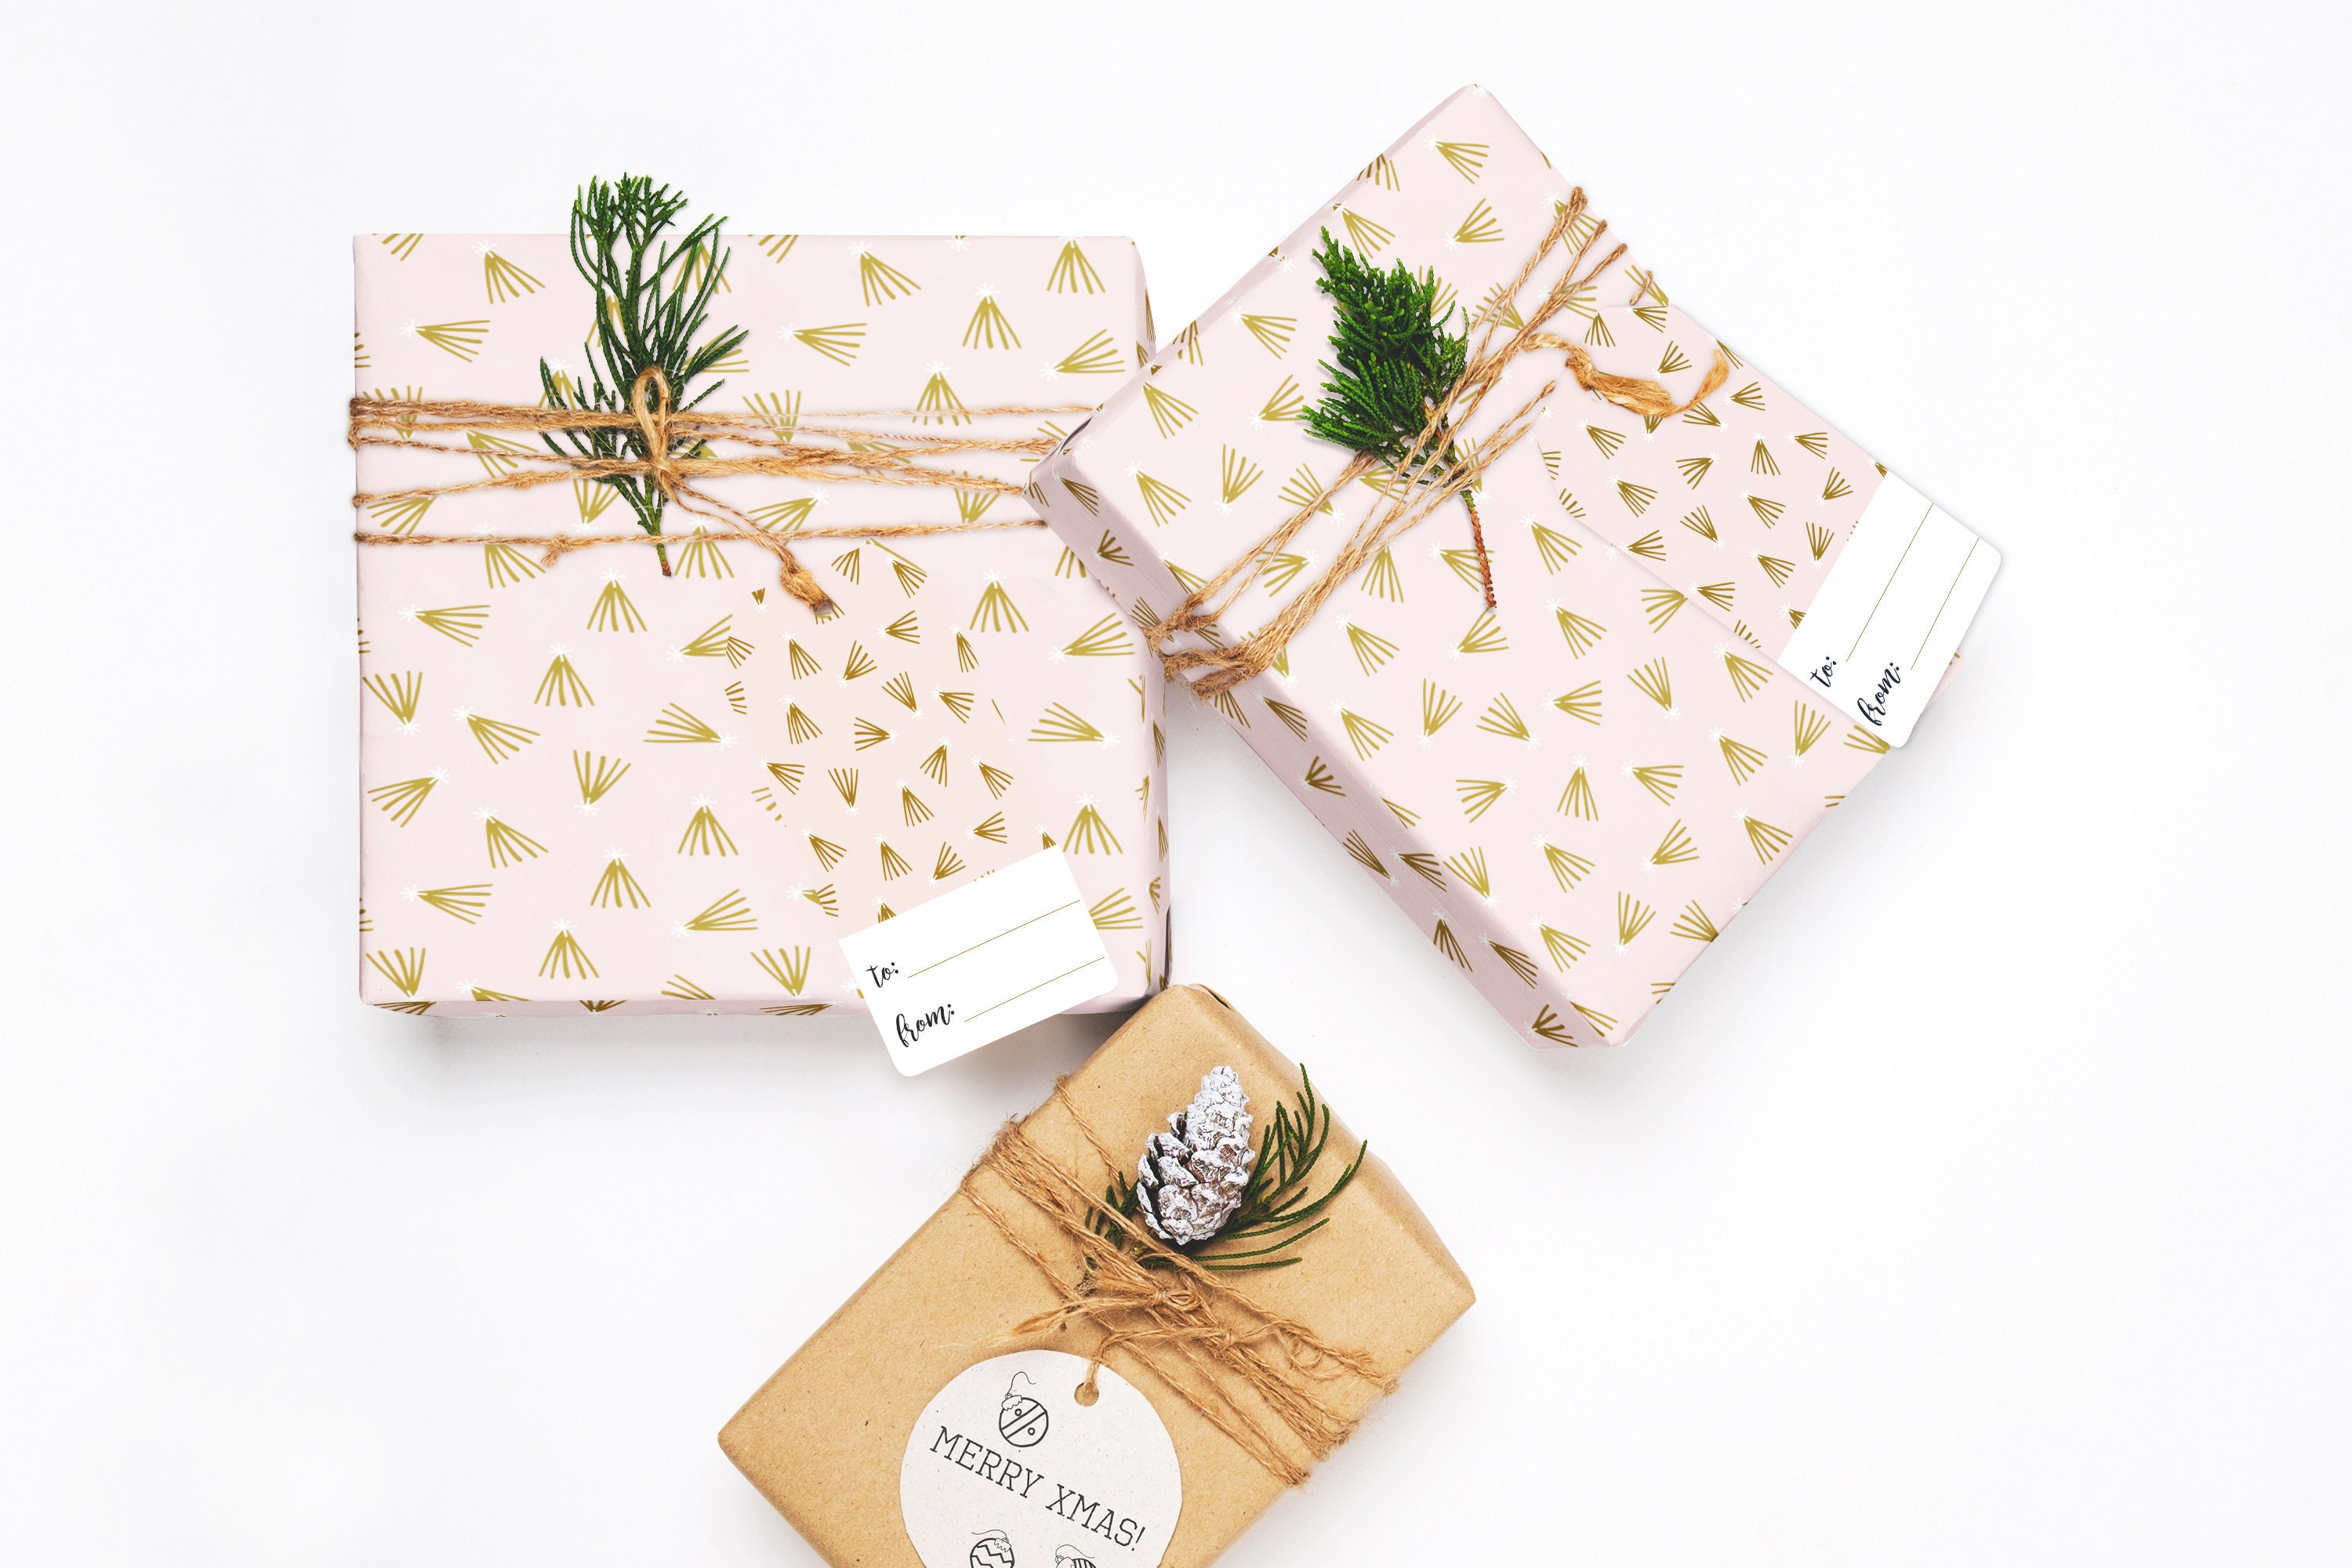 Cute Wrapping Paper Christmas Bundle - Premium Boho Christmas Wrapping  Paper includes 3 Folded Sheets 30 x 20 inches, 3 Coordinating Gift Cards,  and